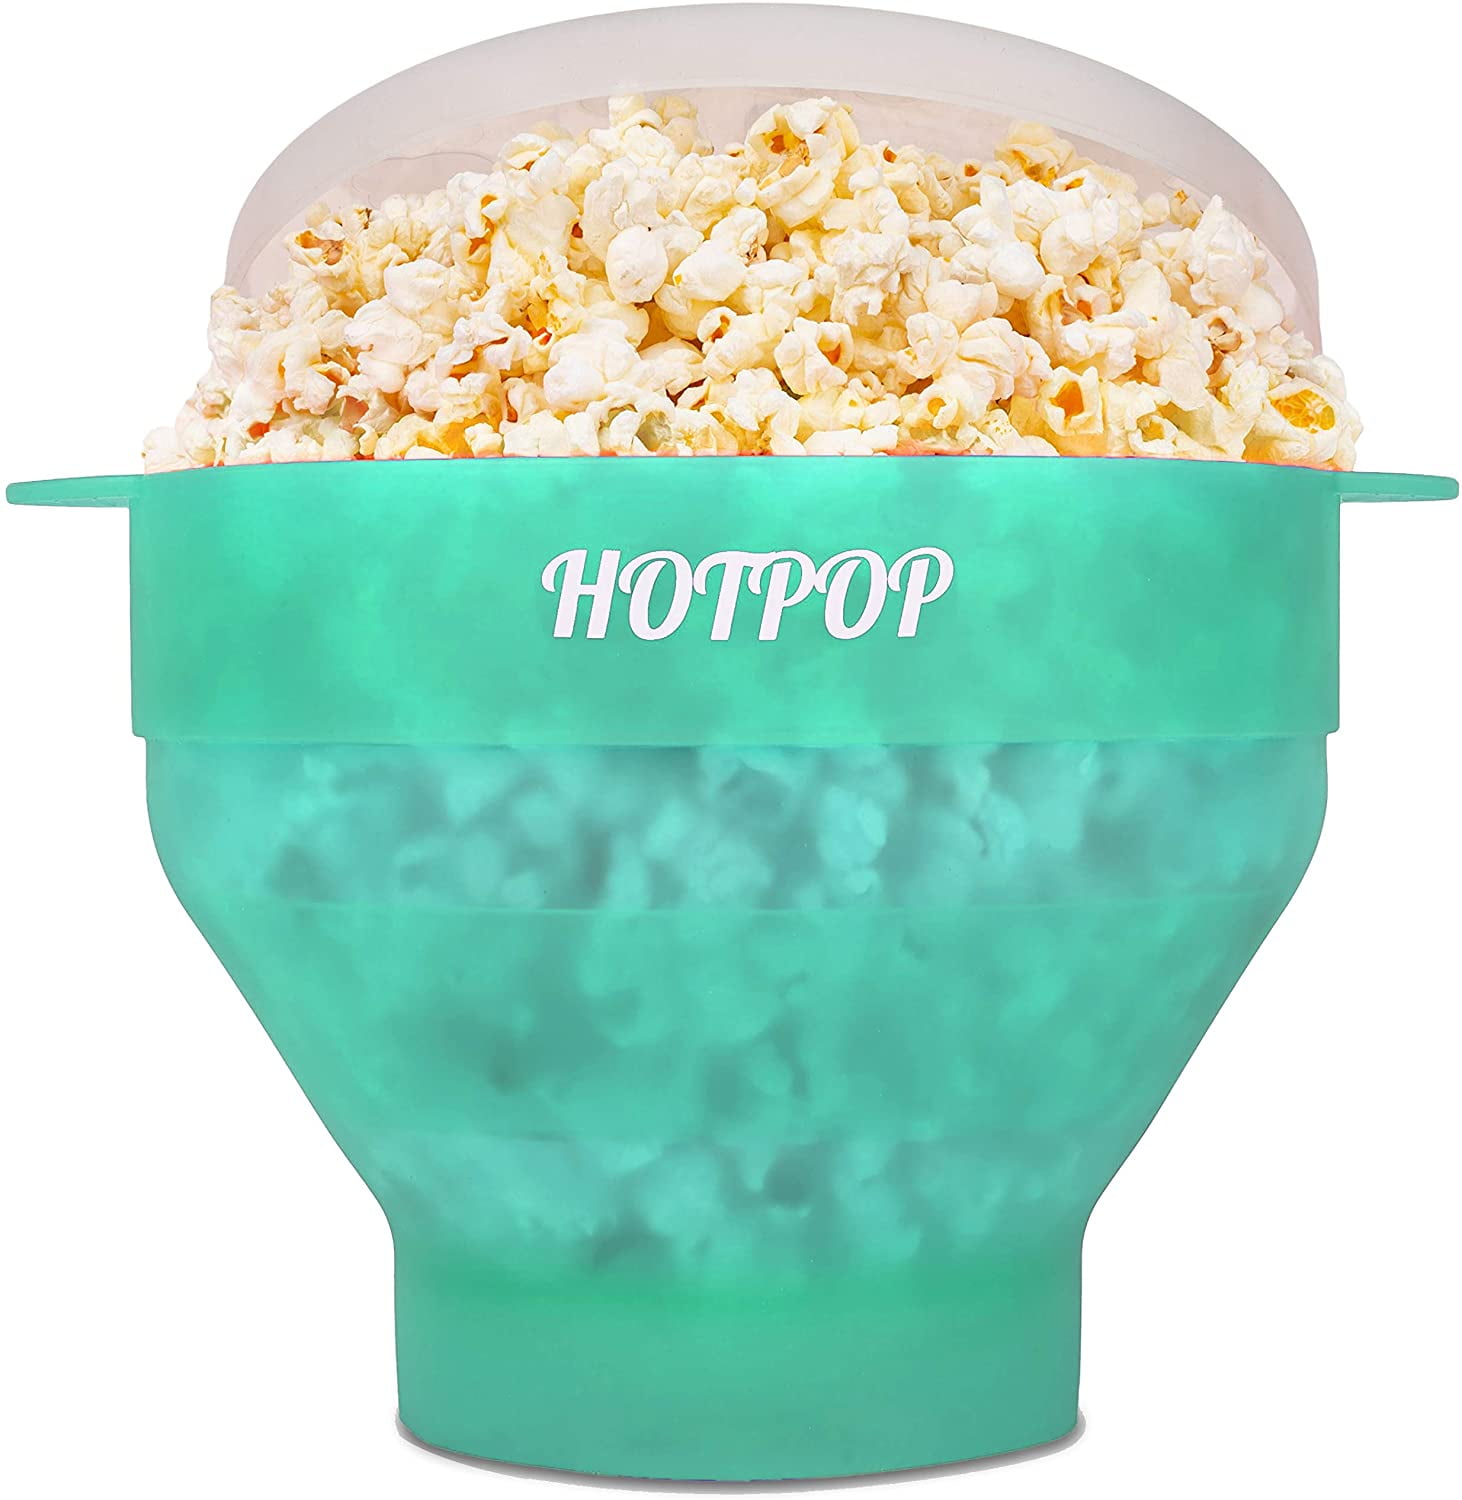 The Original BPA Collapsible Silicone Microwave Popcorn Popper Maker with Lid 